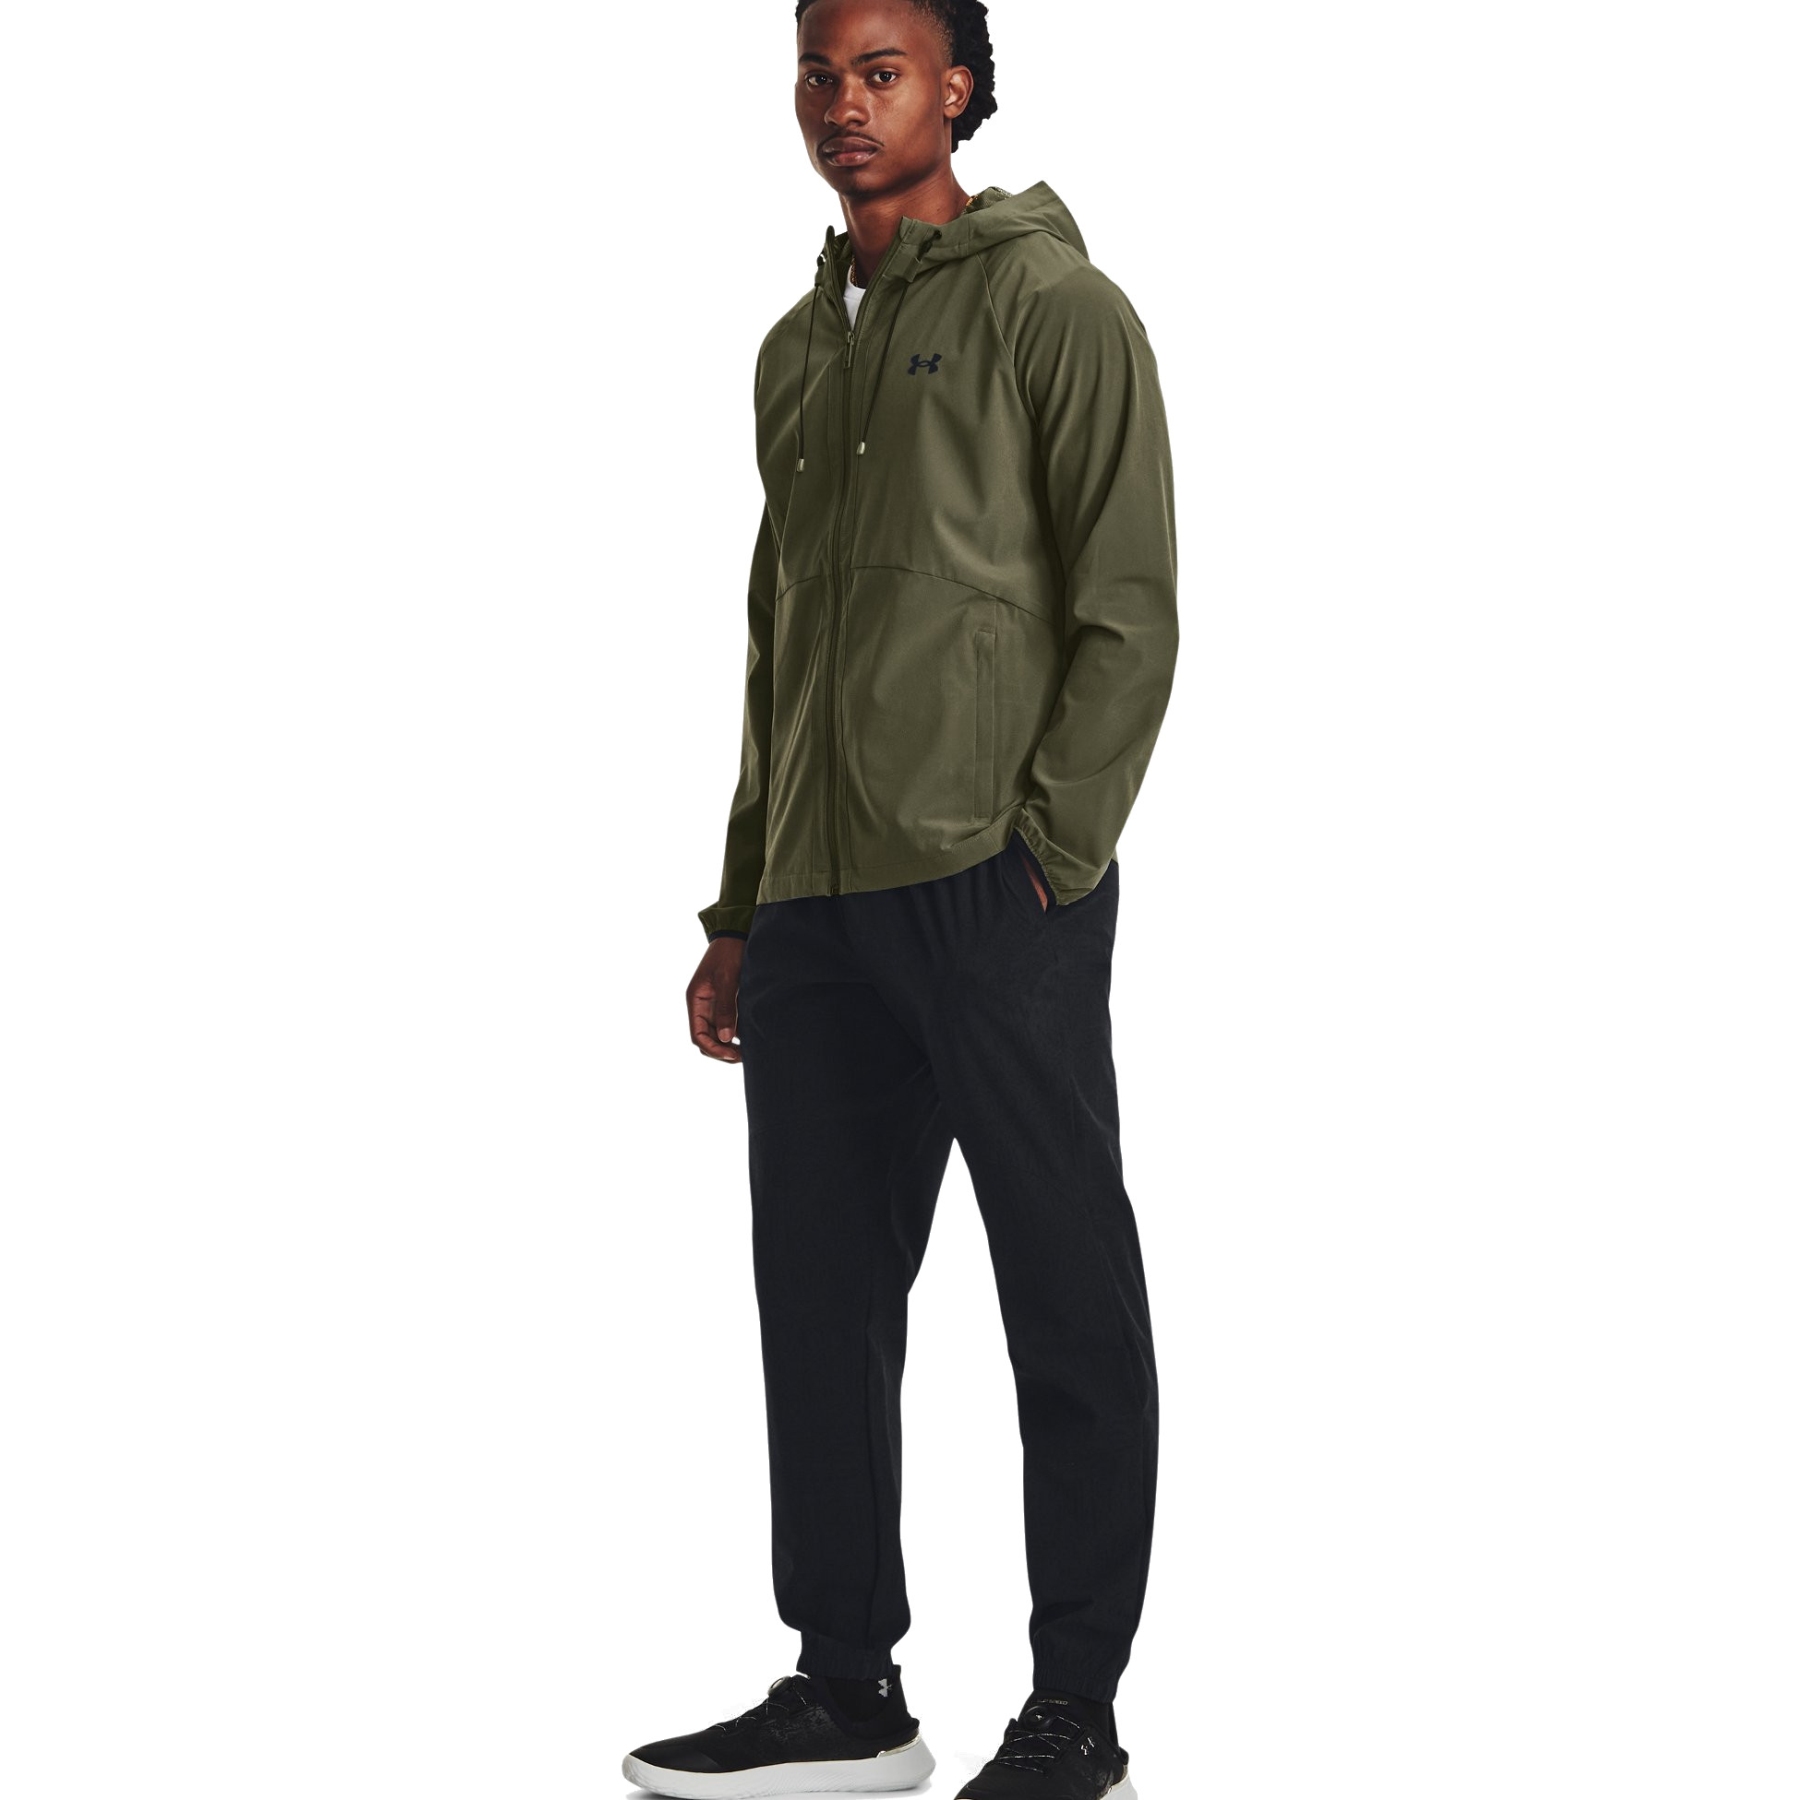 Under Armour Veste Coupe-Vent Homme - UA Stretch Woven - Marine Od  Green/Black